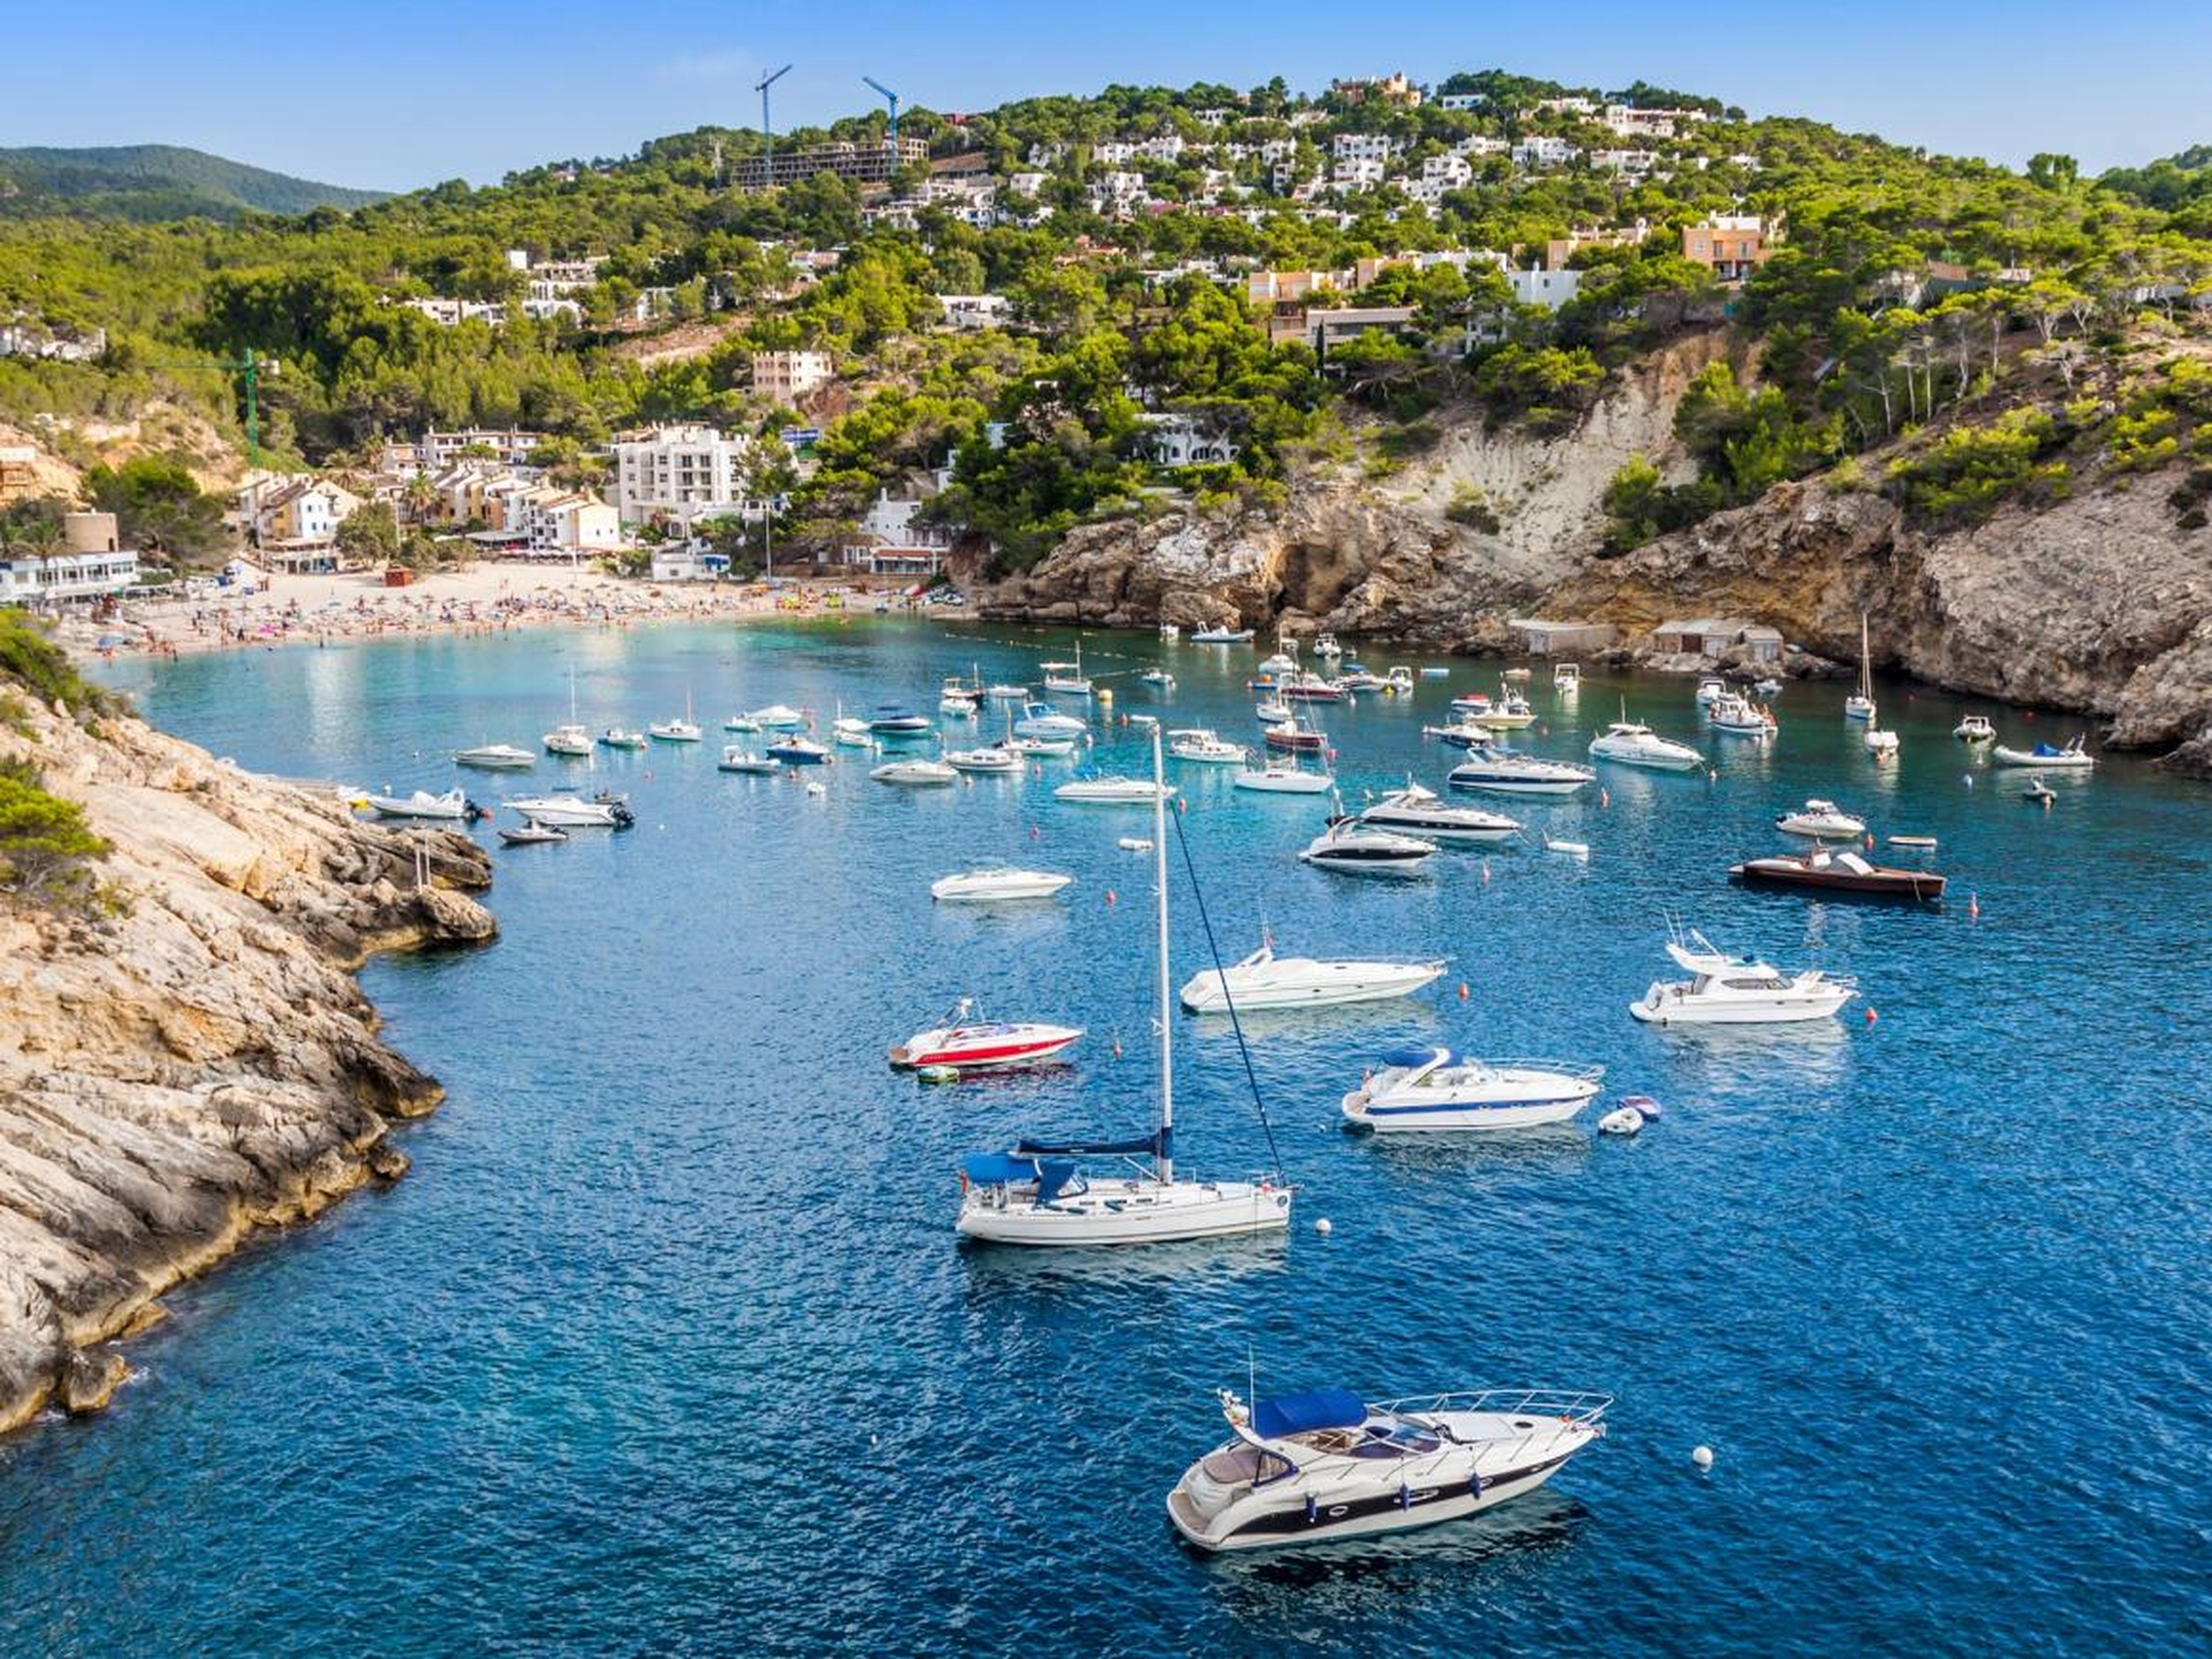 Located in the Balearic Islands of Spain and around 220 square miles, Ibiza is known both for its swanky beach hotels and villas frequented by the wealthy and famous and for its thumping nonstop clubbing scene.